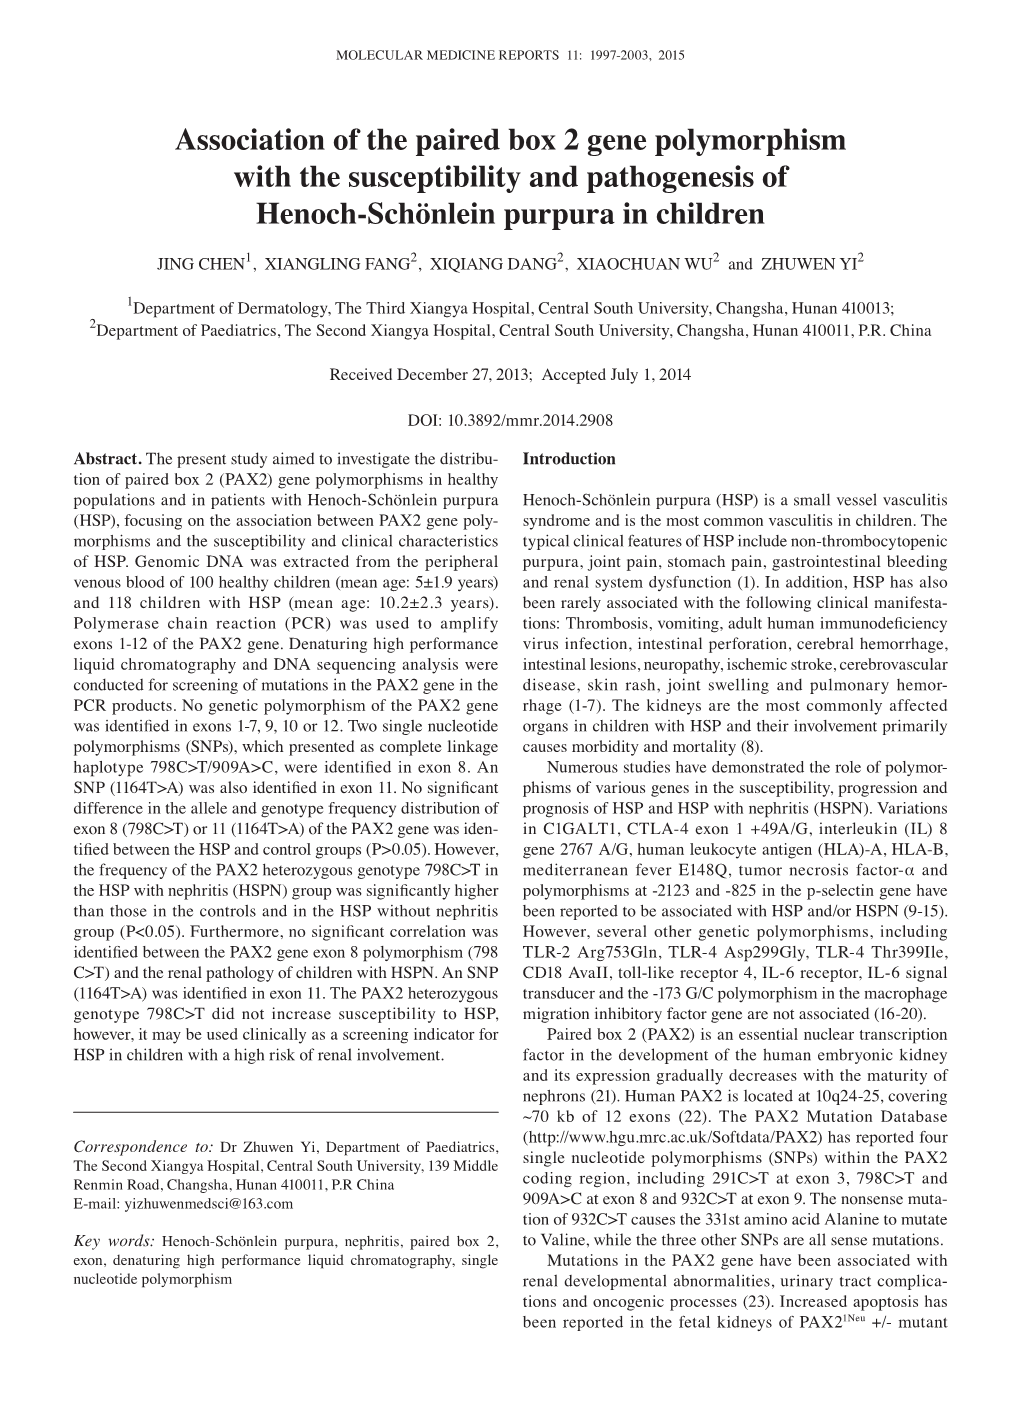 Association of the Paired Box 2 Gene Polymorphism with the Susceptibility and Pathogenesis of Henoch‑Schönlein Purpura in Children